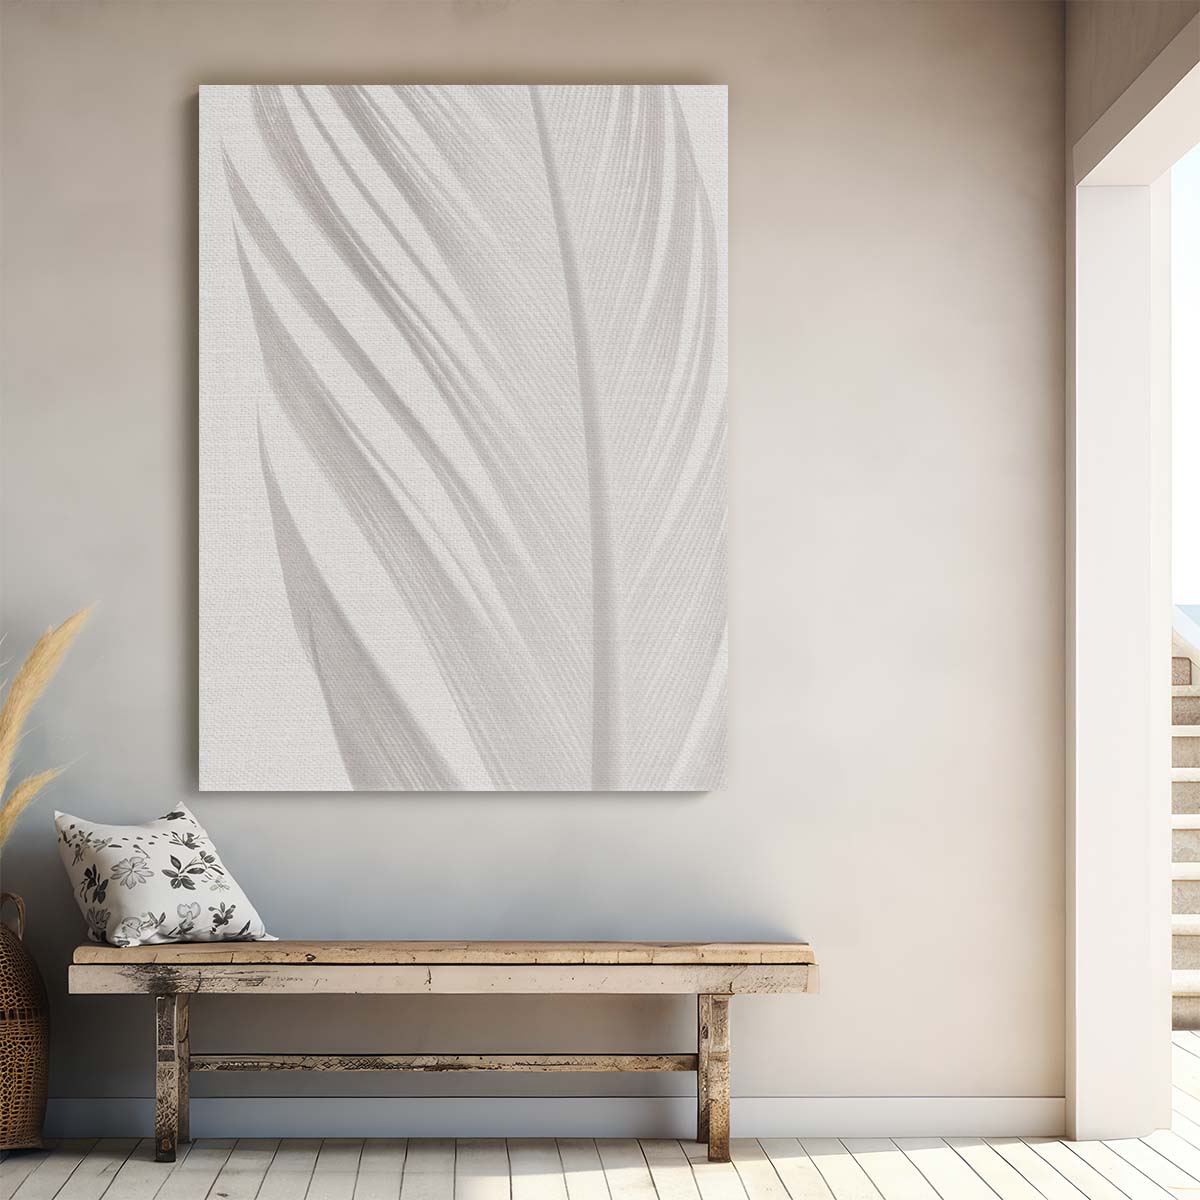 Monochrome Still Life Photography - Soft White Bird Feather Artwork by Luxuriance Designs, made in USA